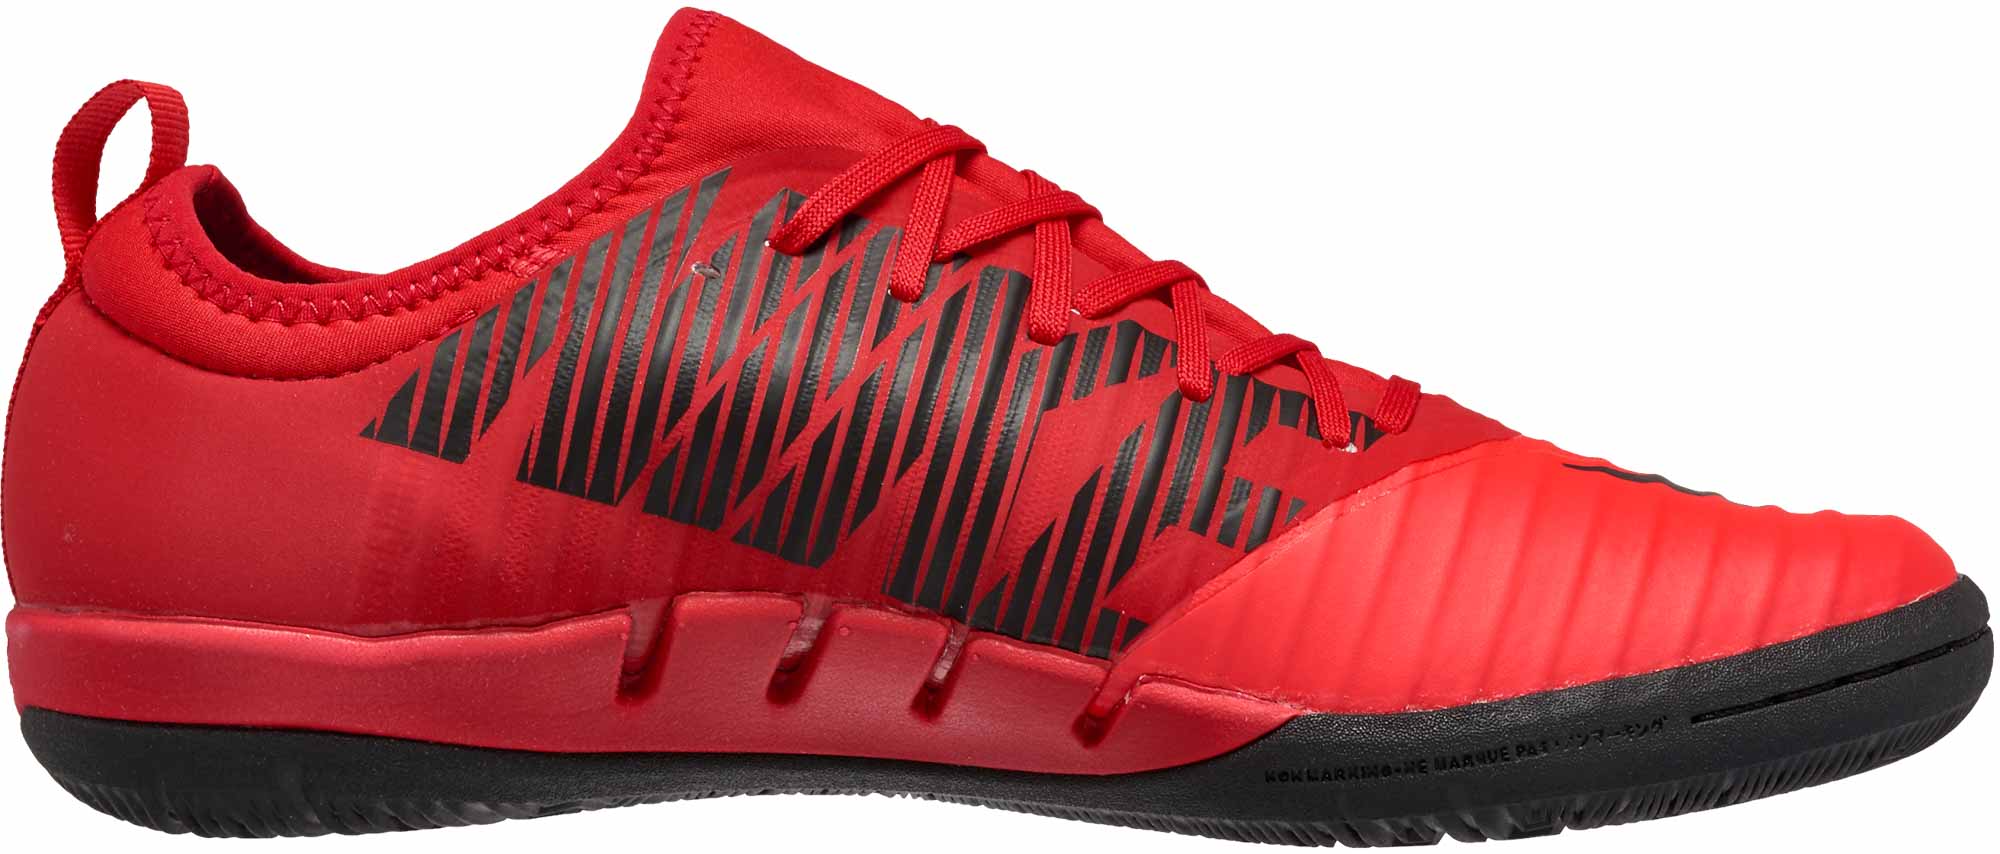 Drive out Do well () Sophisticated Nike MercurialX Finale II IC - Red Indoor Soccer Shoes